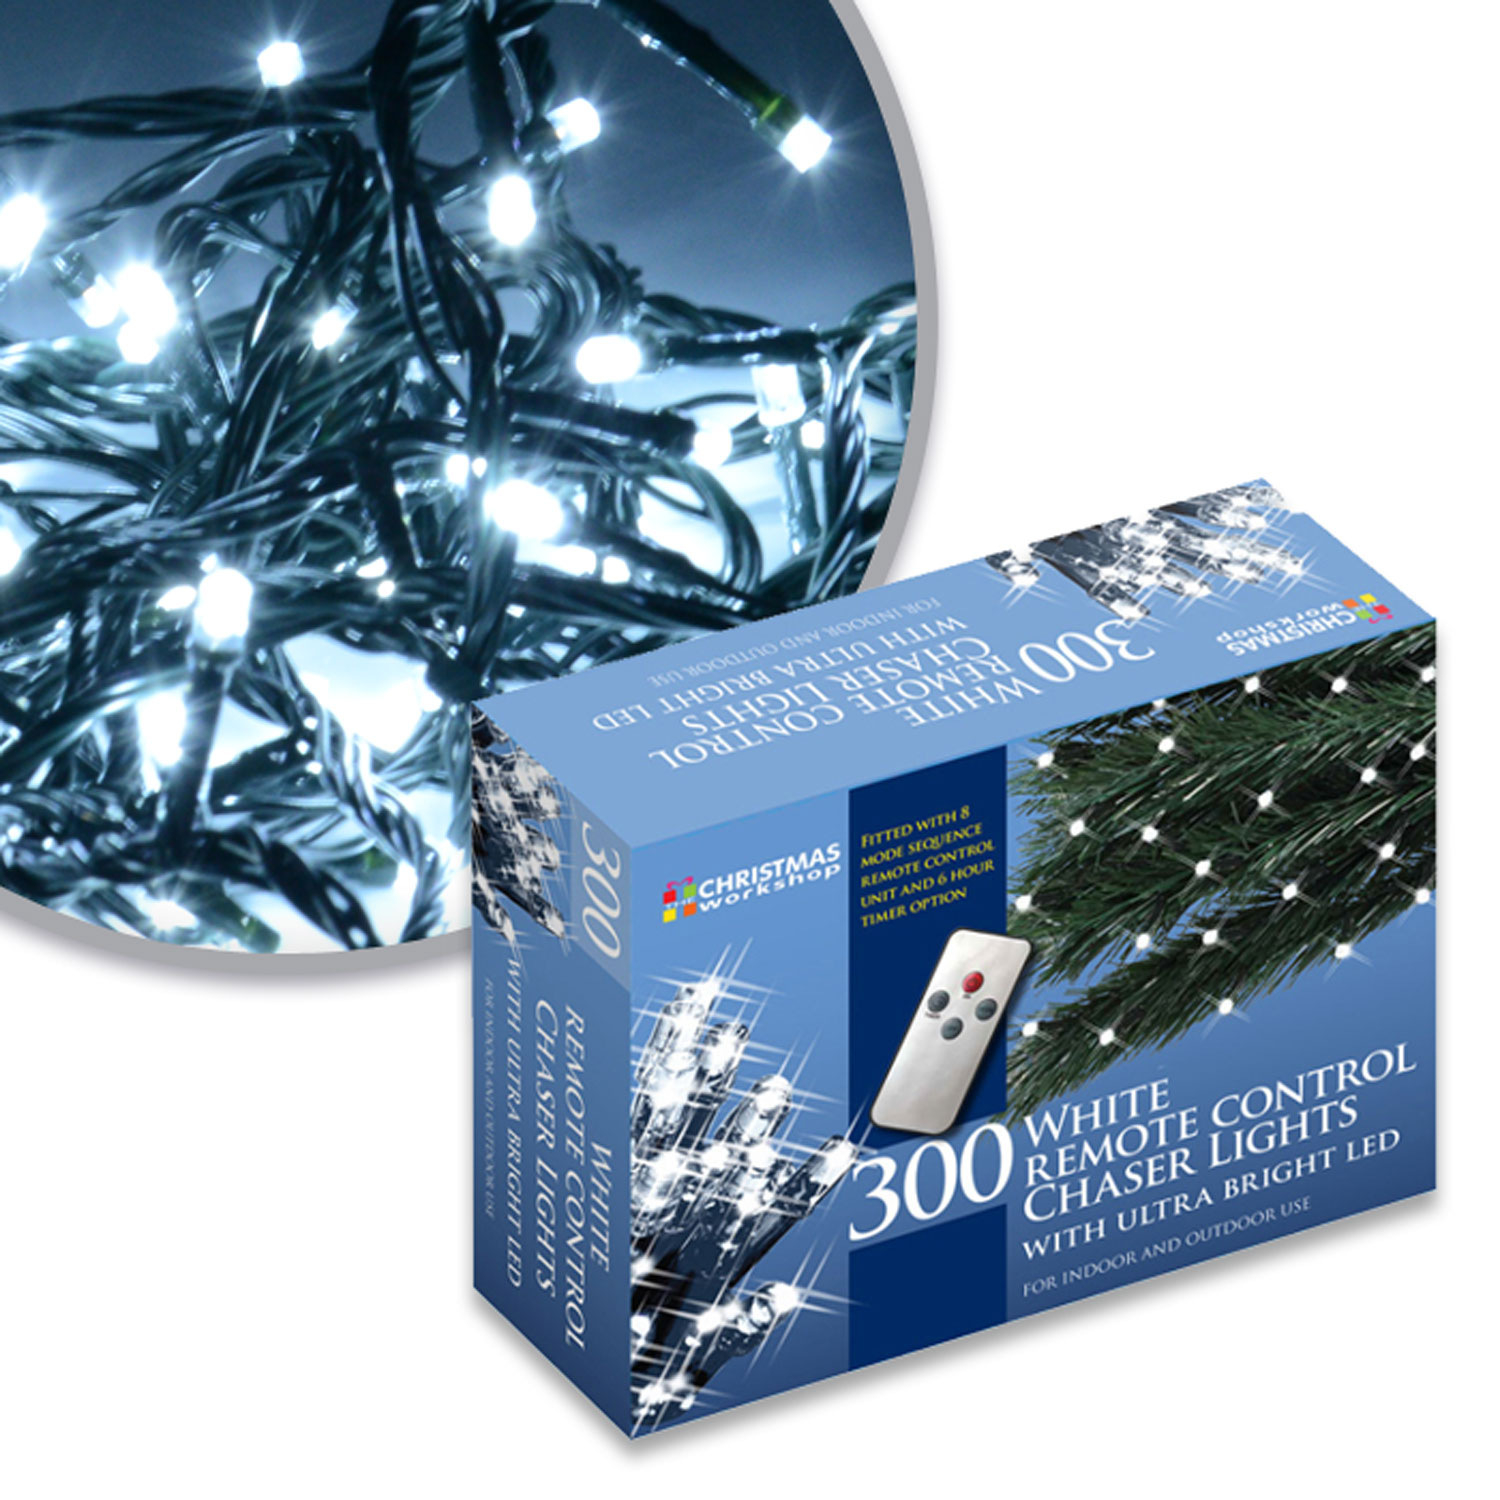 79200 The Christmas Workshop 300 Remote Control Led Chaser Lights in dimensions 1500 X 1500